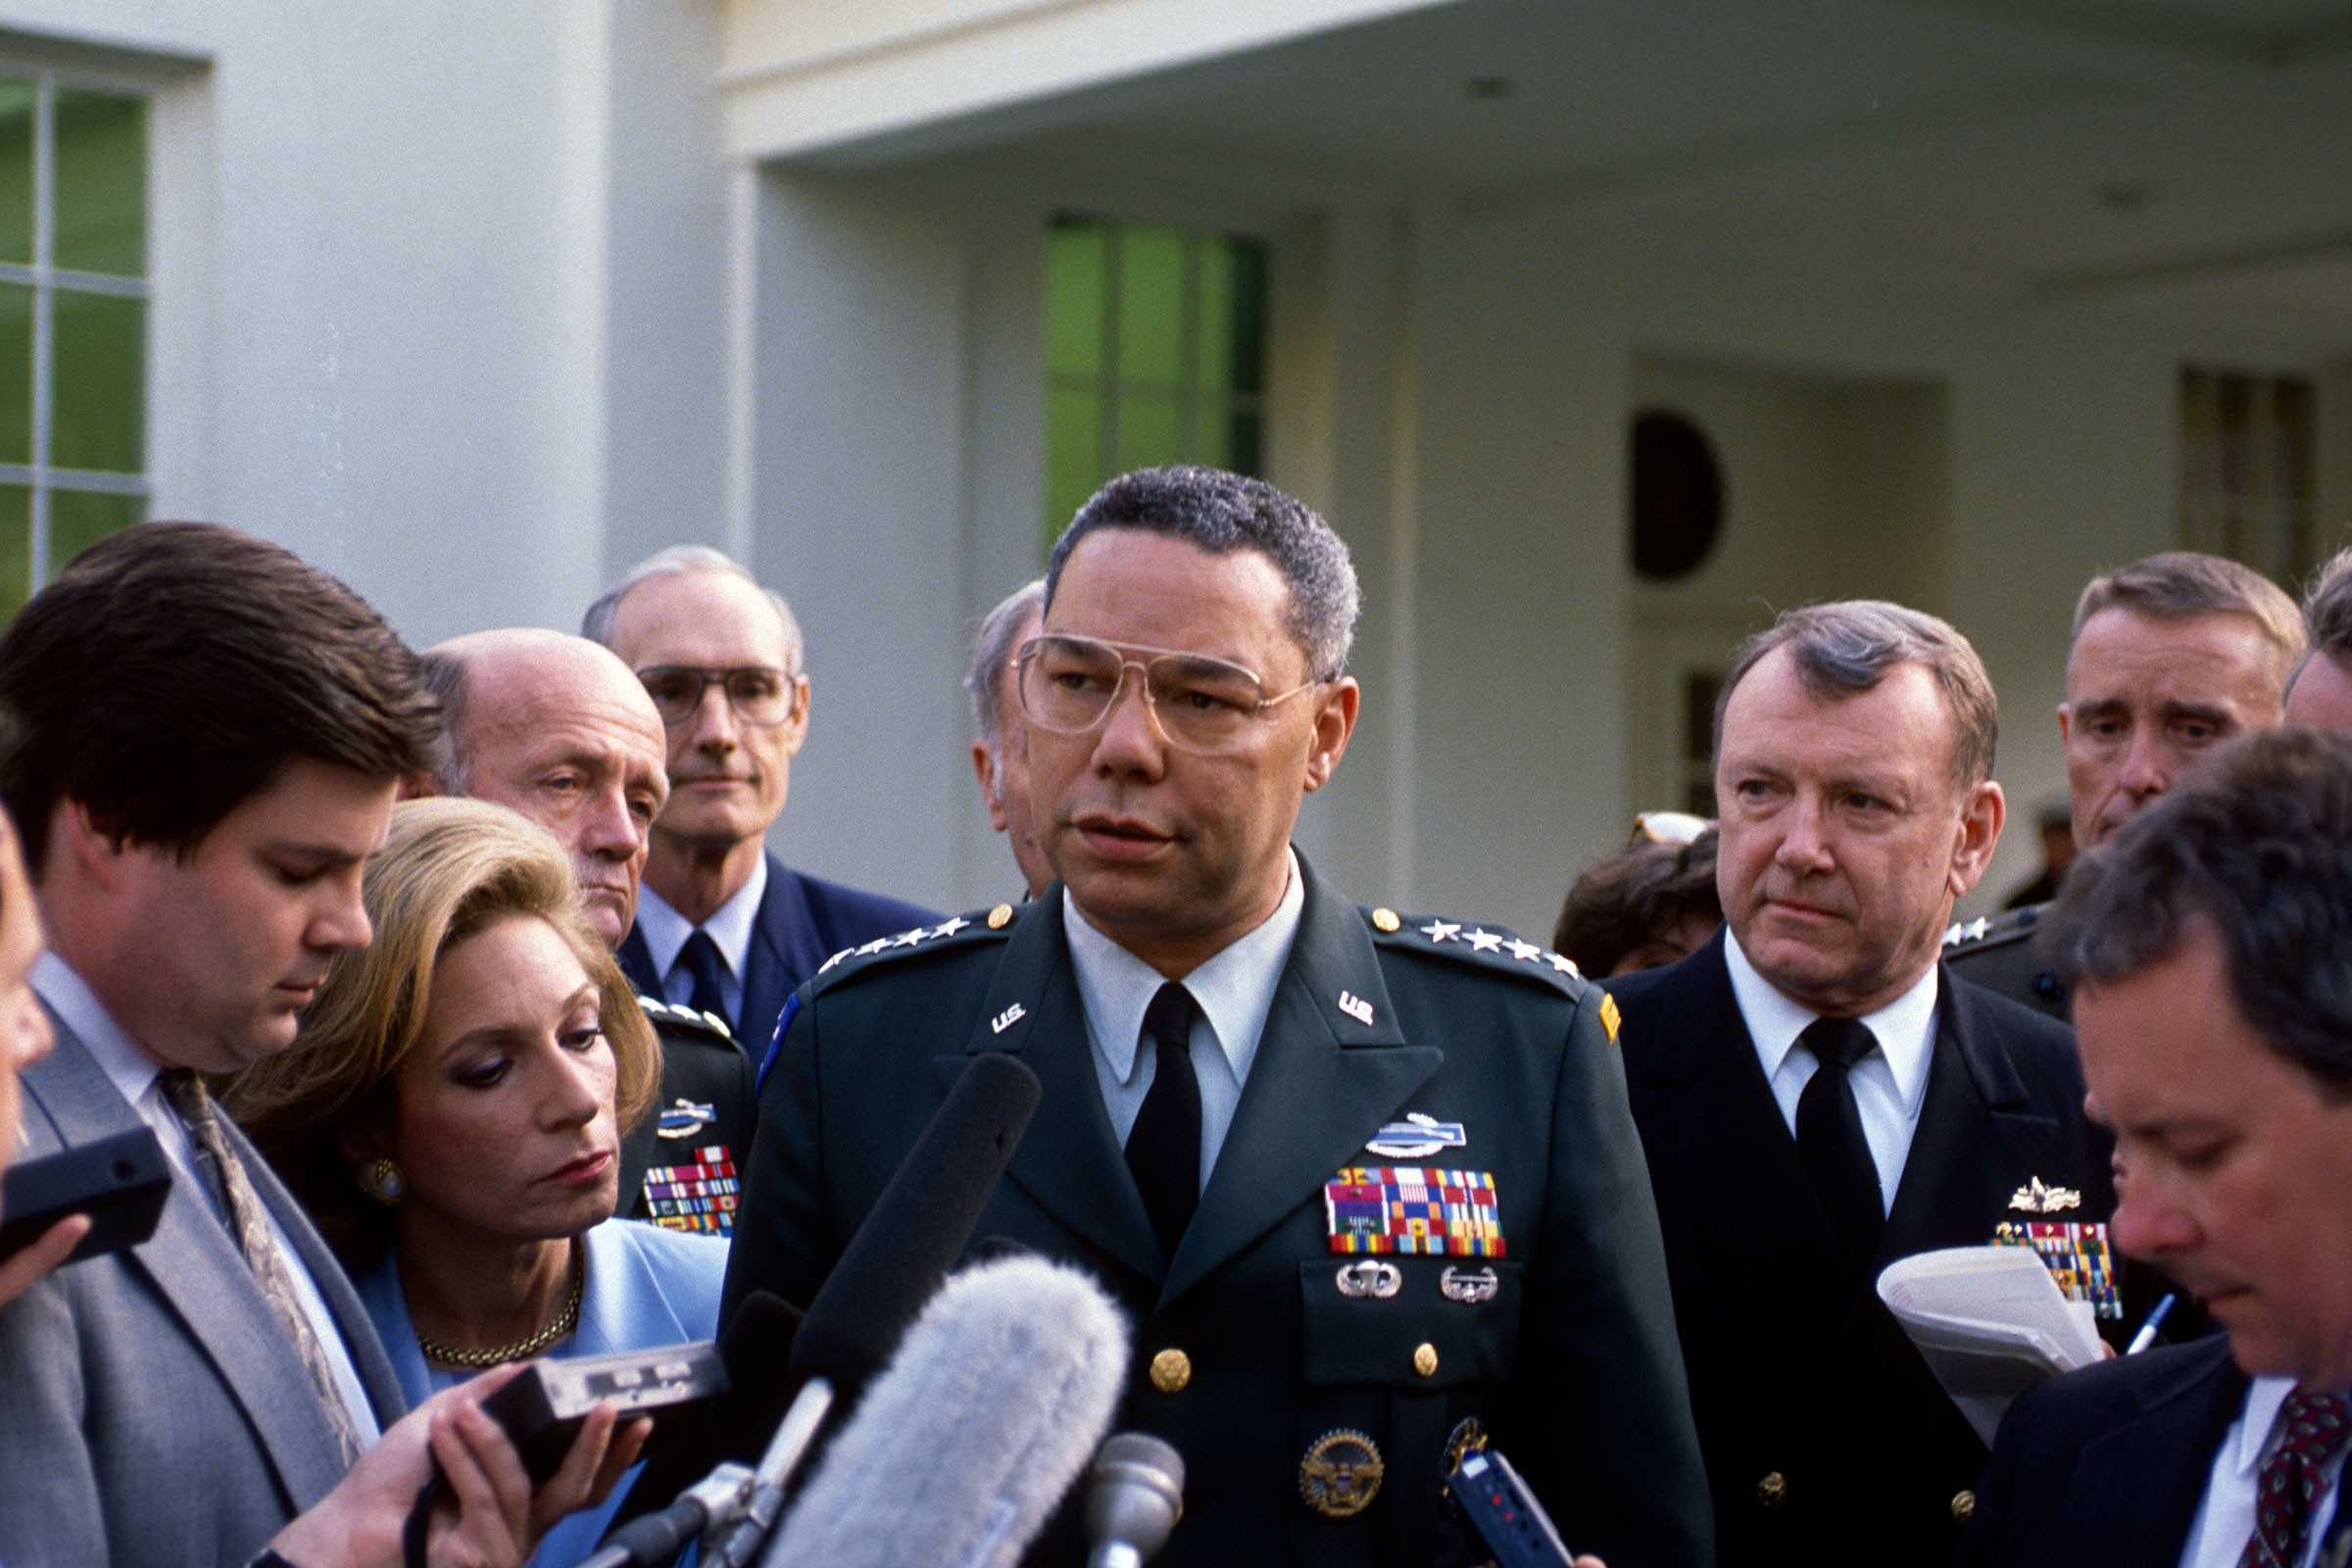 Chairman of the Joint Chiefs of Staff American General Colin Powell talks with reporters in the West Wing driveway, in 1993. (Mark Reinstein—Corbis/Getty Images)